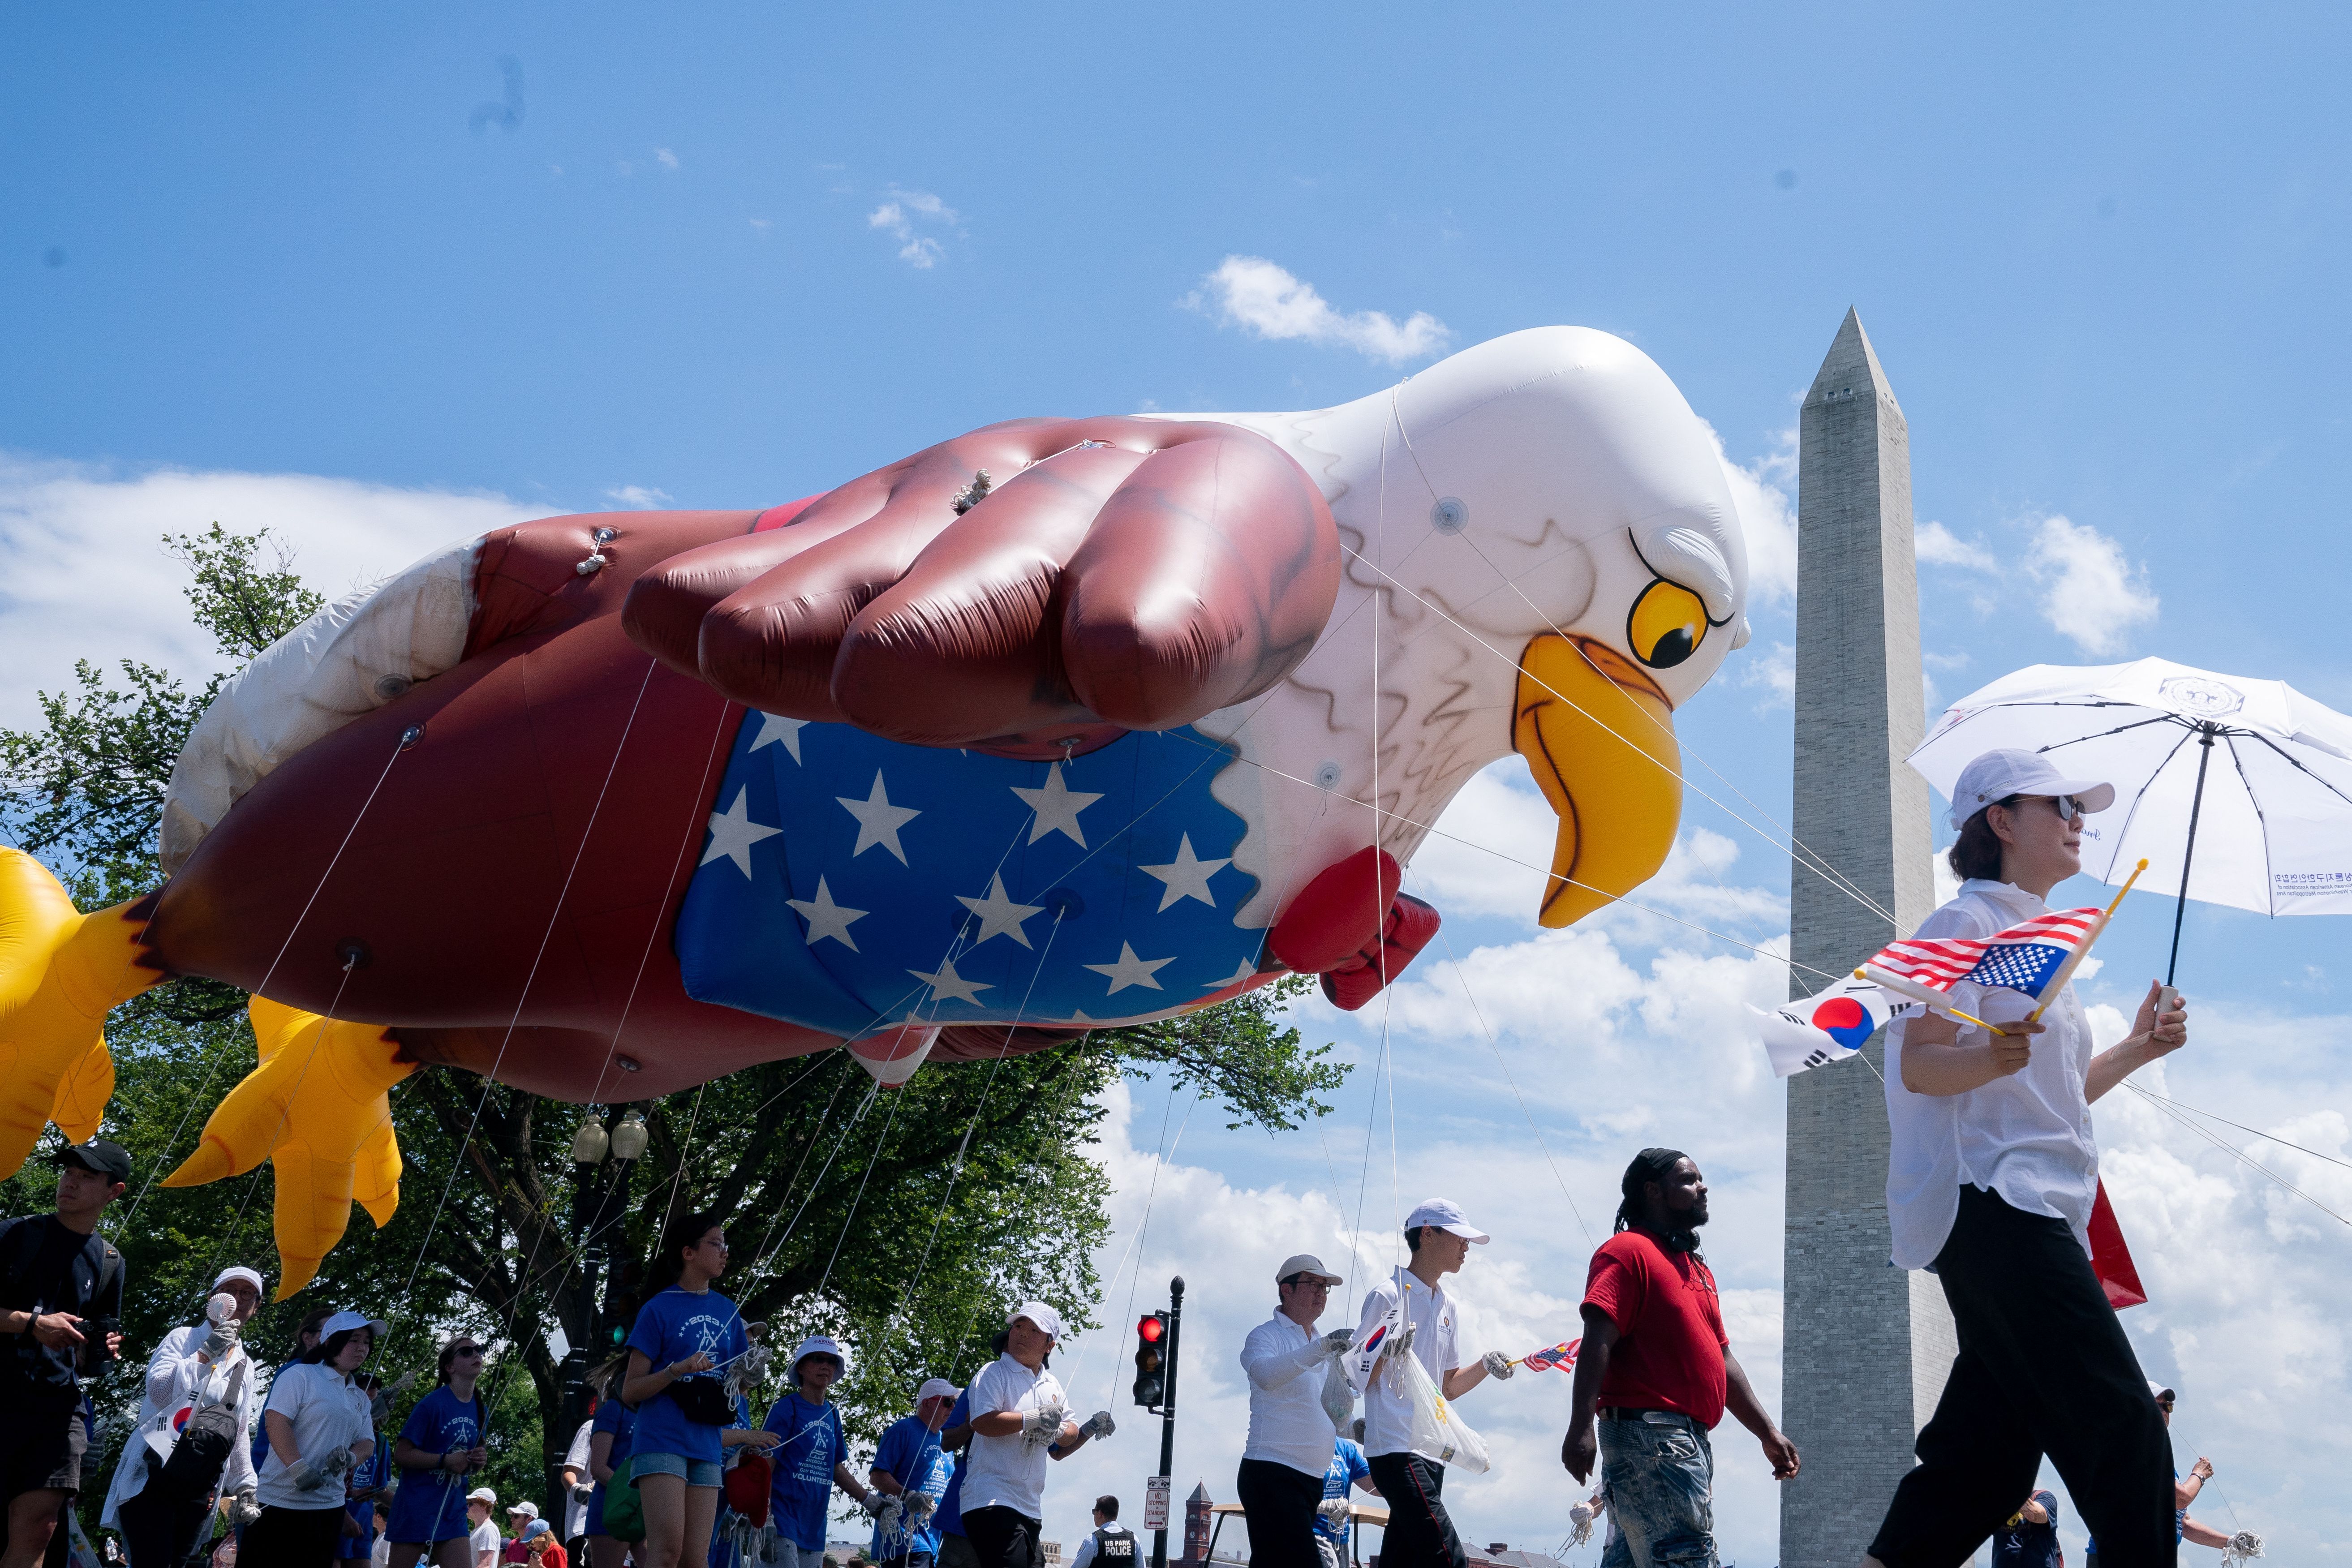 The Washington Monument is seen as participants march during the National Independence Day Parade in Washington, DC, on July 4, 2023.